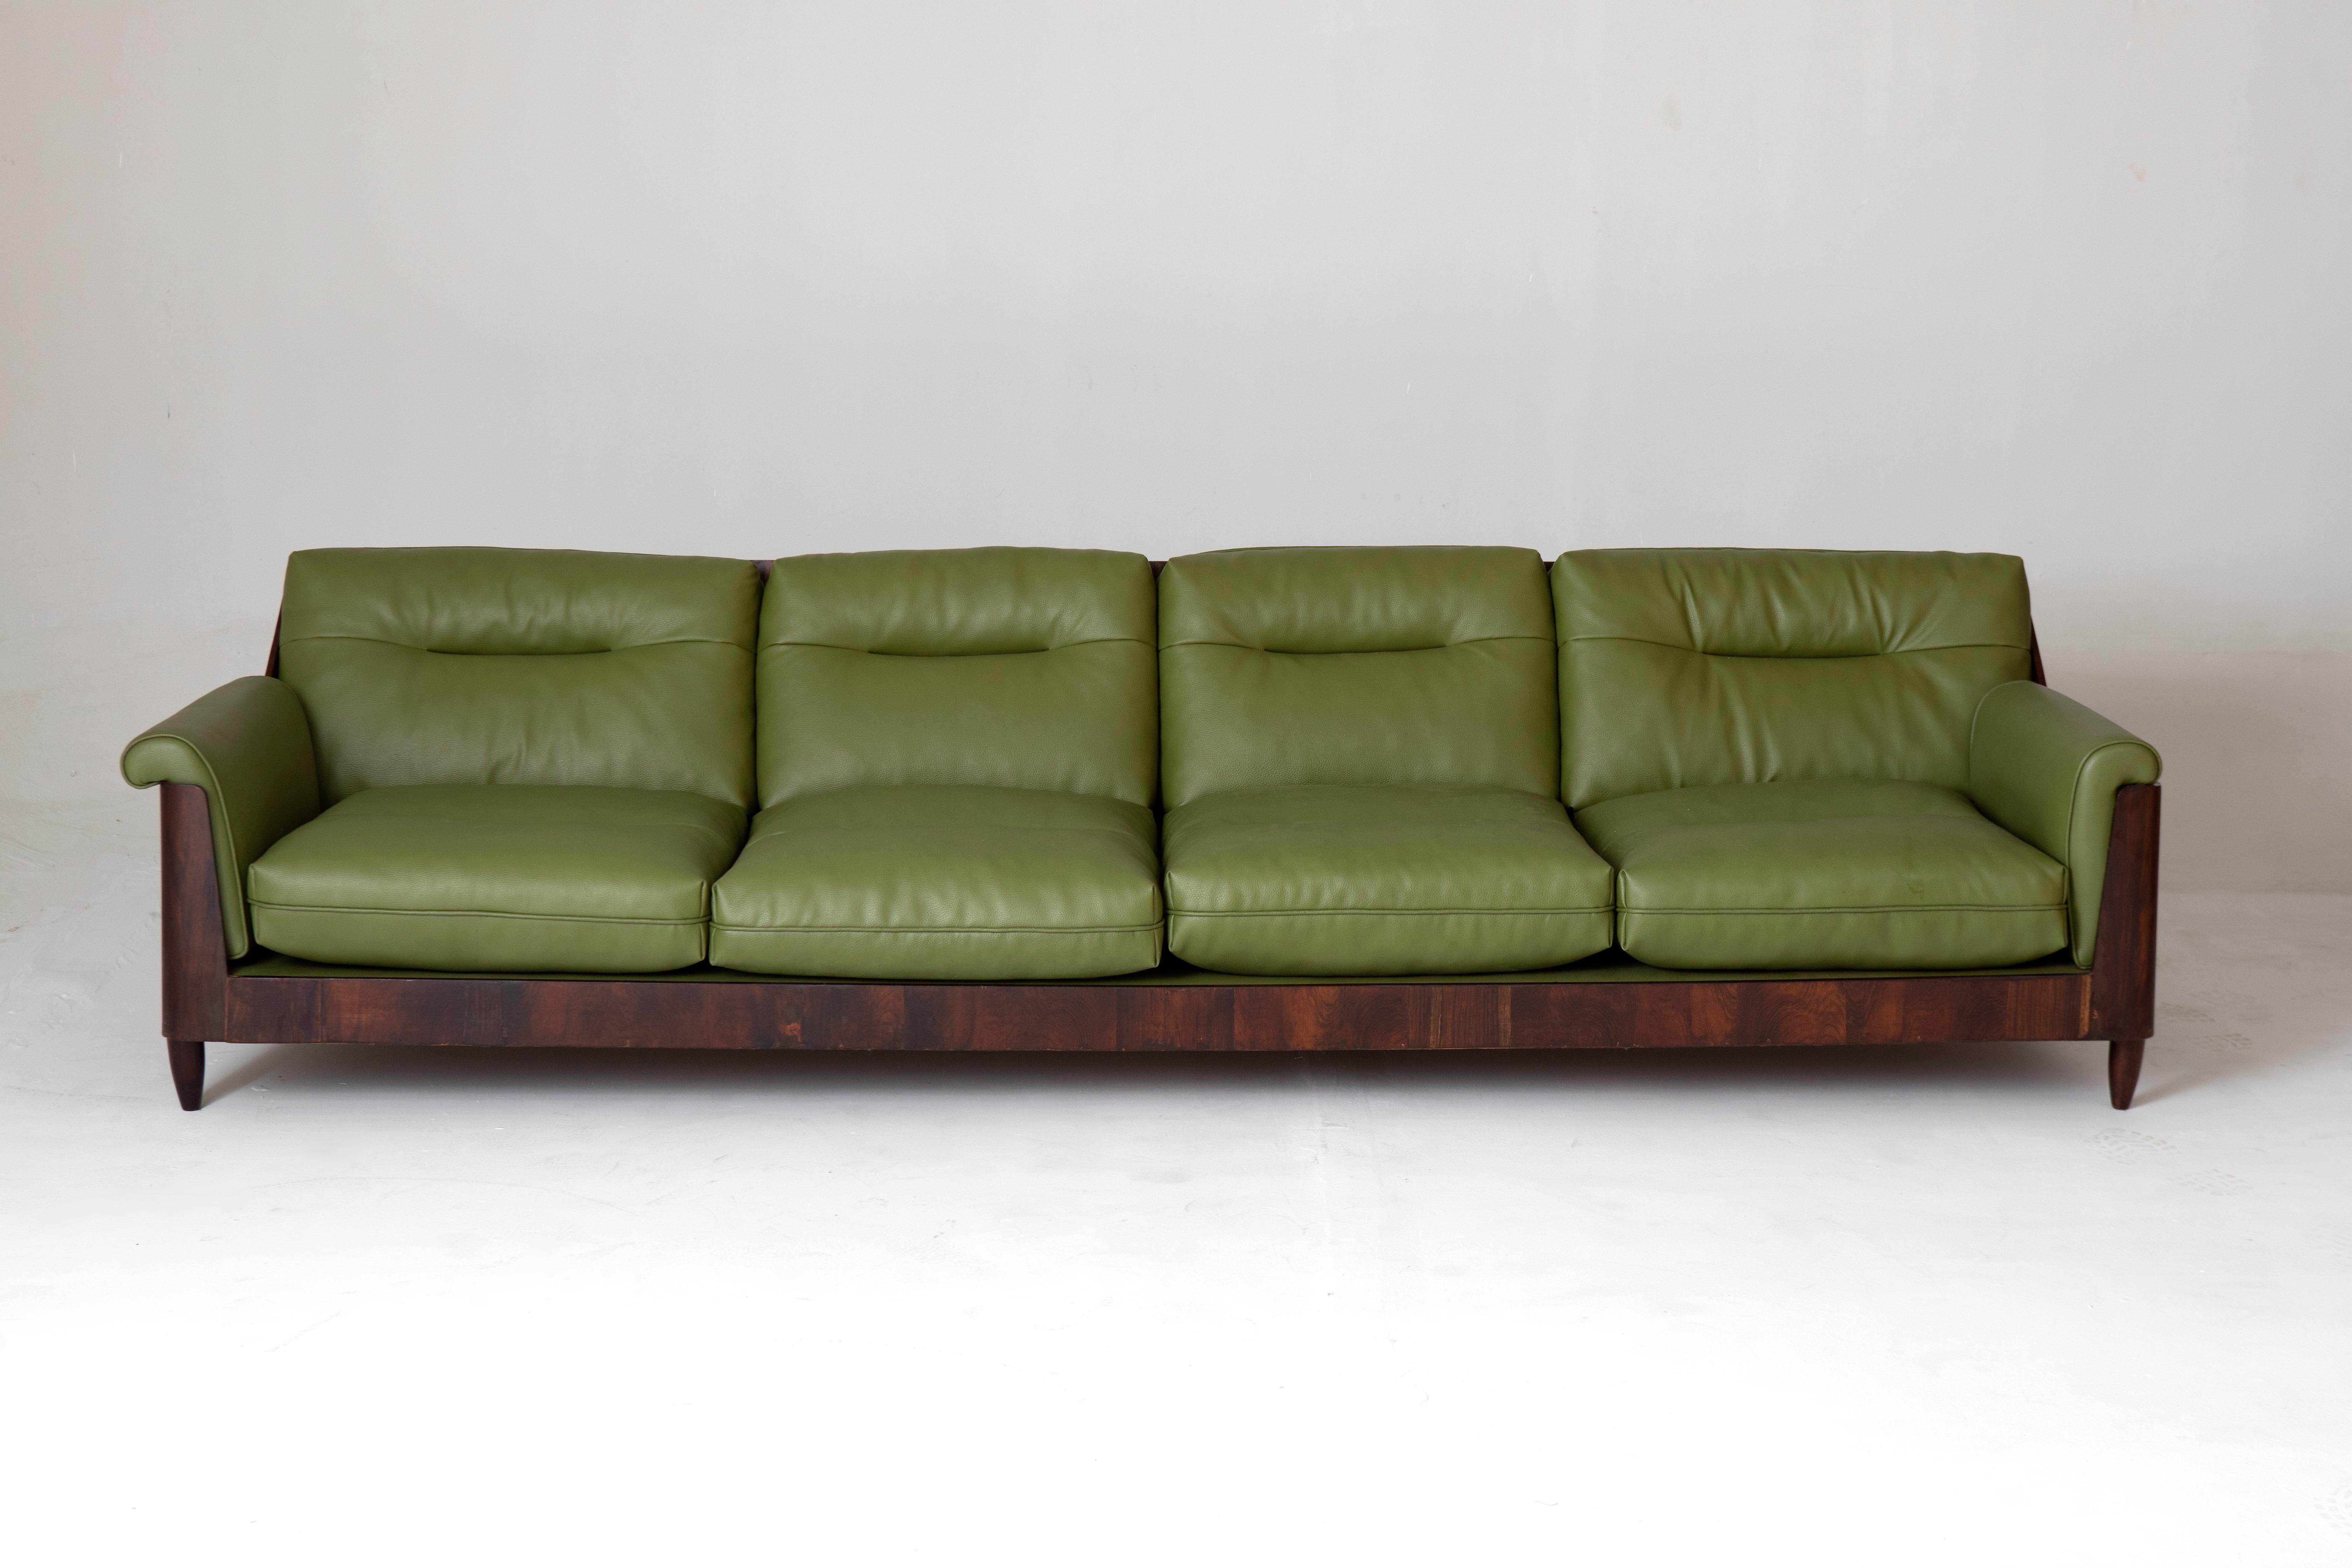 Varnished Mid-Century Modern Sofa by Novo Rumo, 1960s For Sale